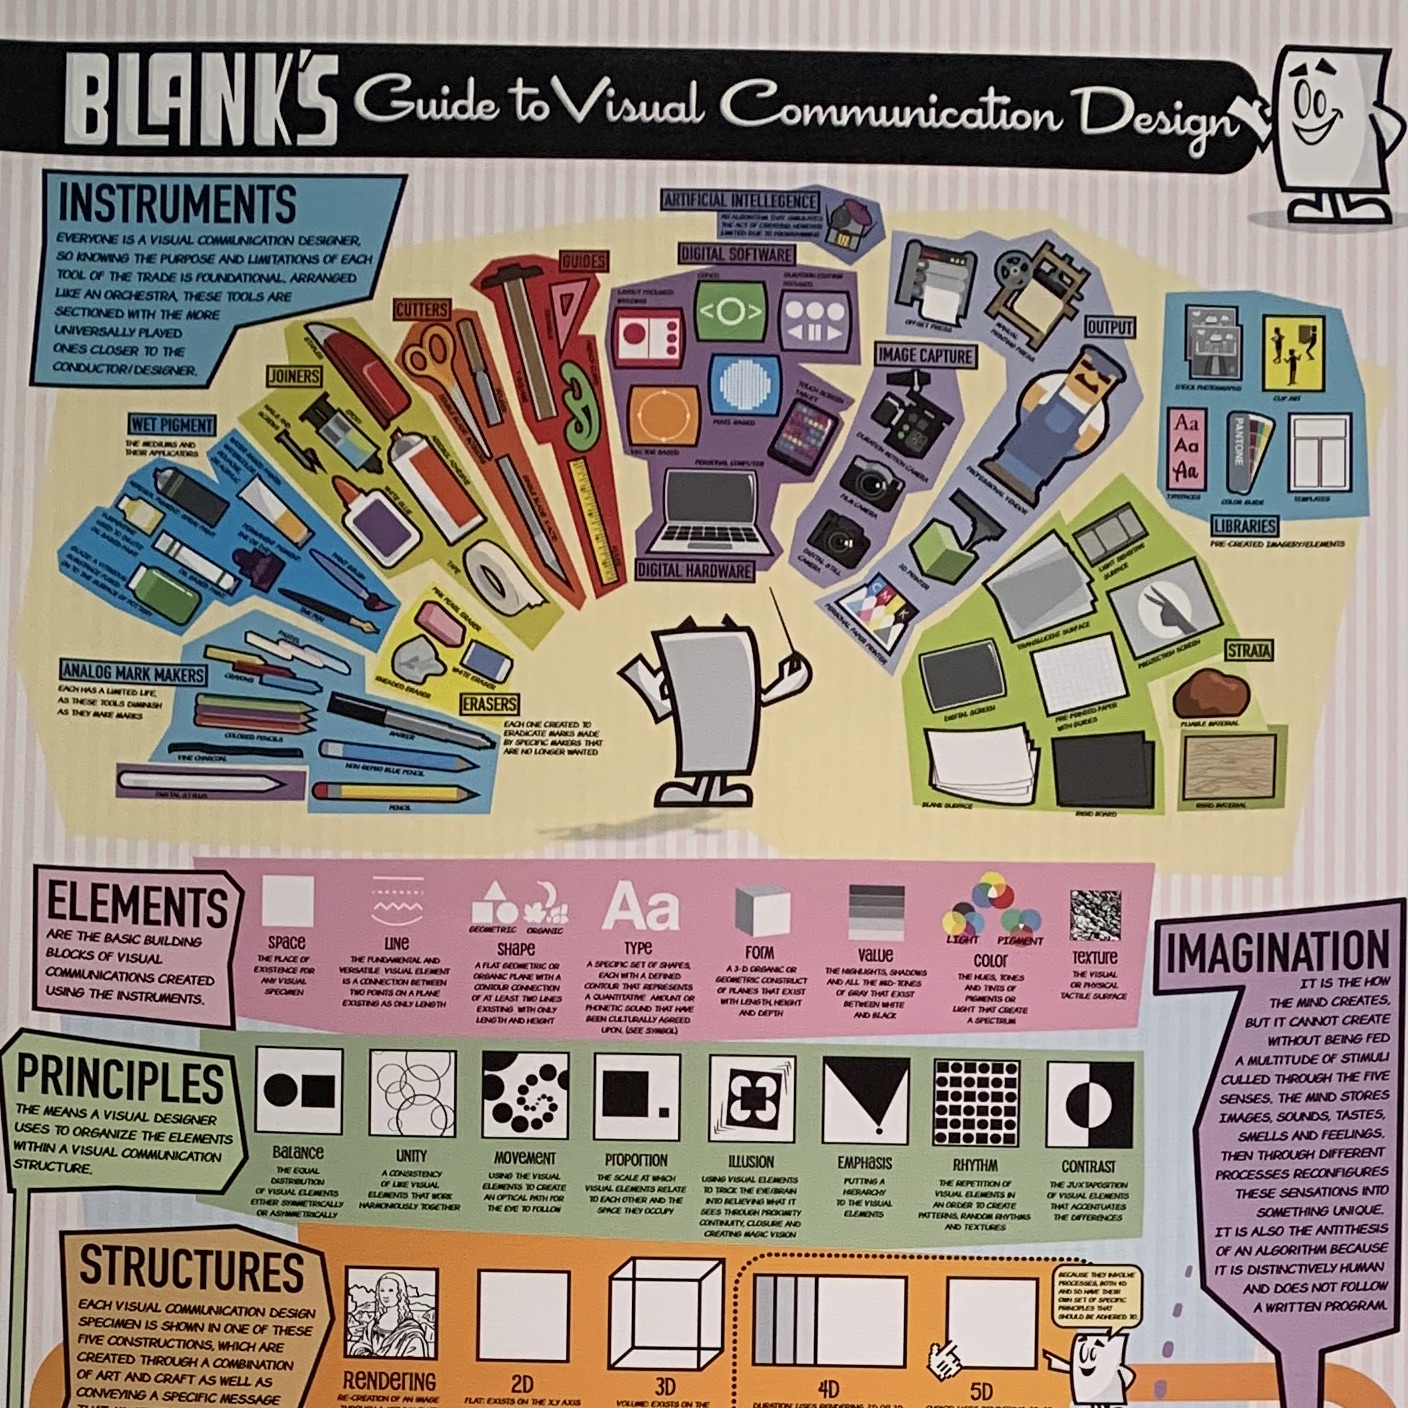 Blank’s Guide to Visual Communication Design: Image description: colorful poster of blank"s guide to visual communication design with blank describing aspects of vcd